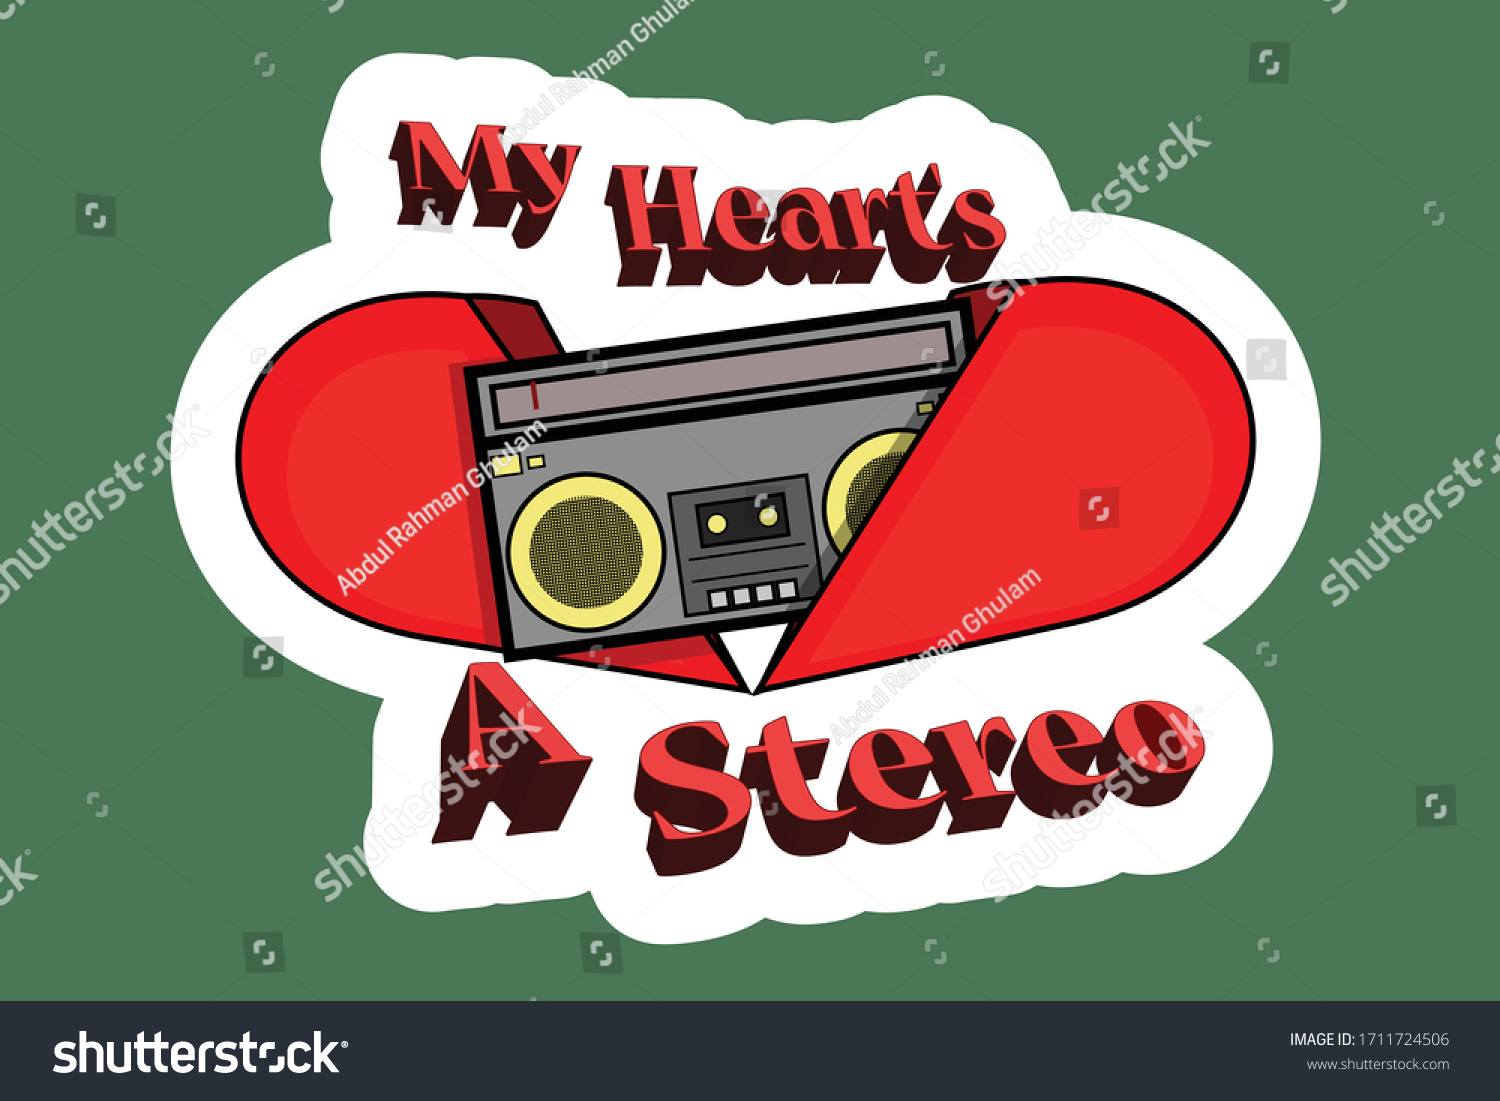 My heart a stereo